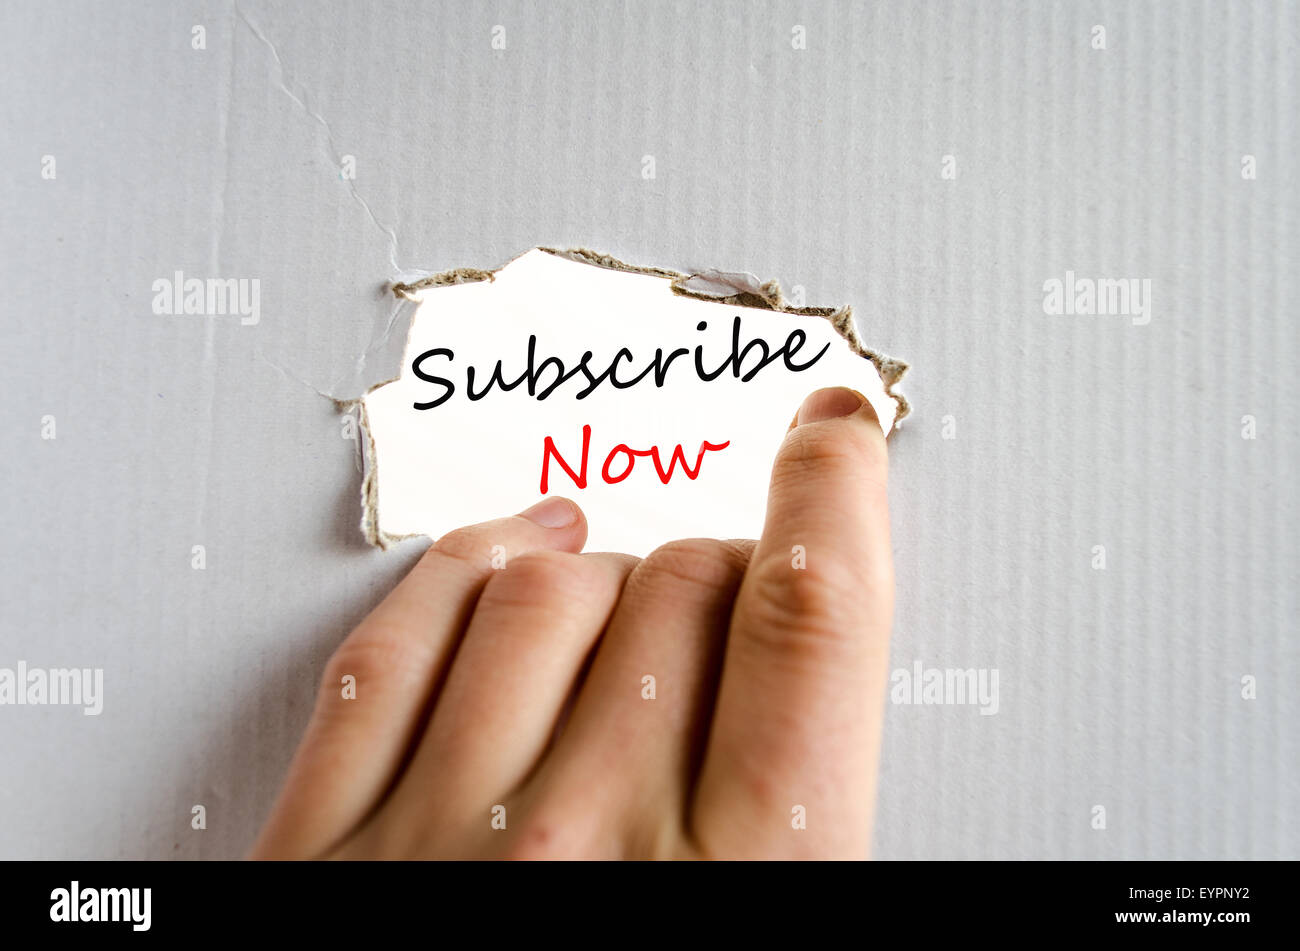 Subscribe now hand concept isolated over white background Stock Photo